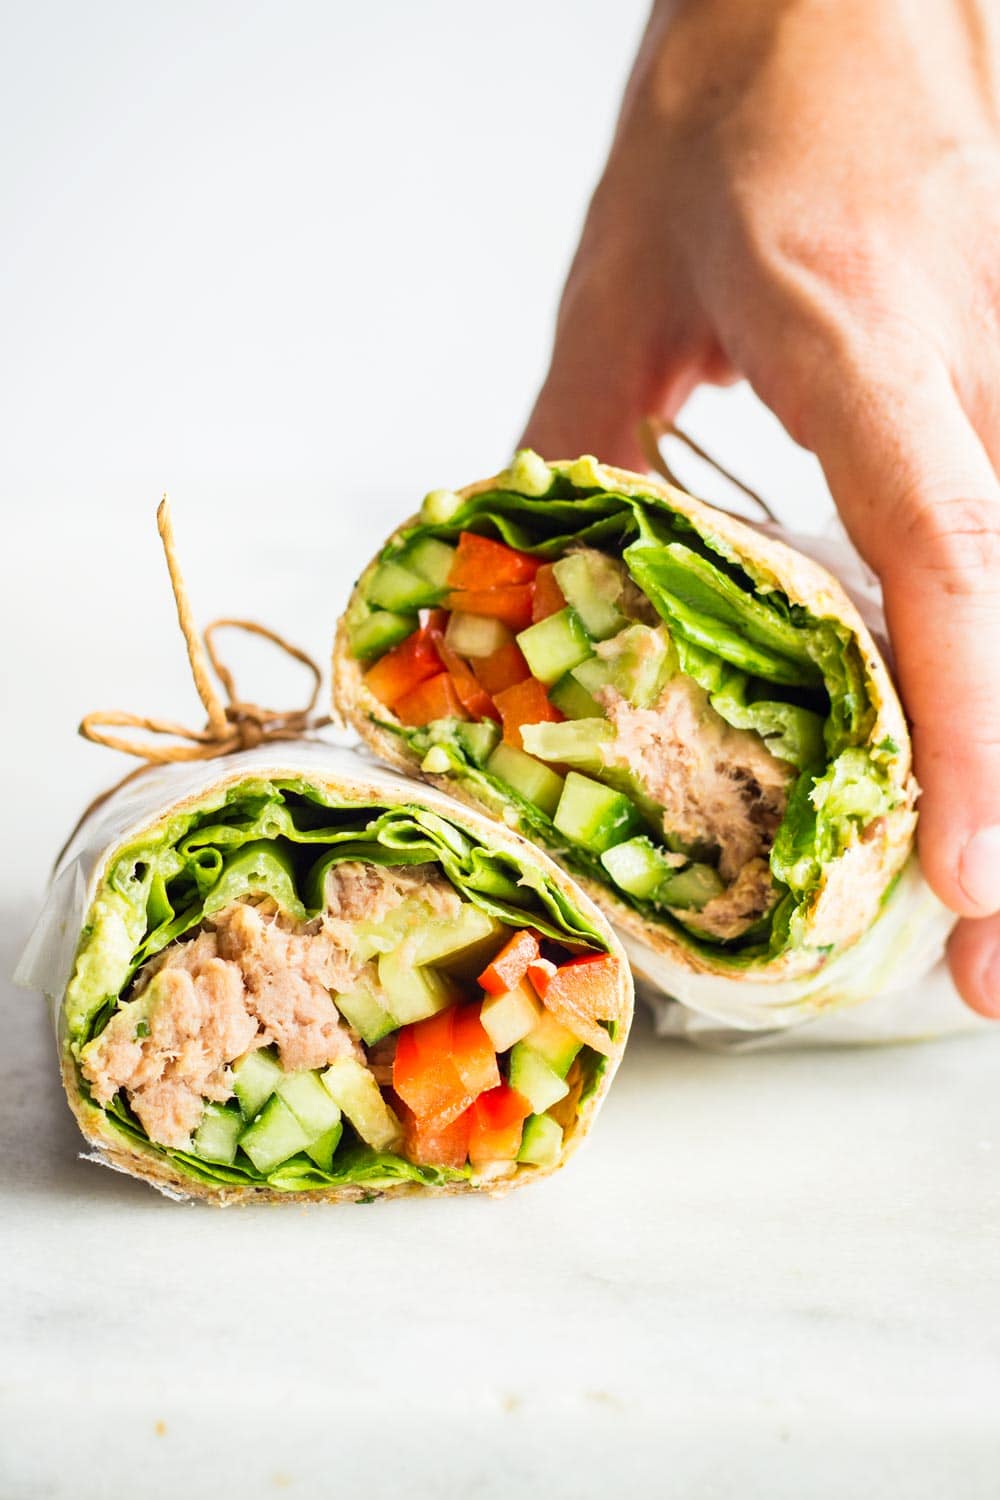 Hand holding a Healthy Tuna Wrap cut in two halves tied with jute twine.